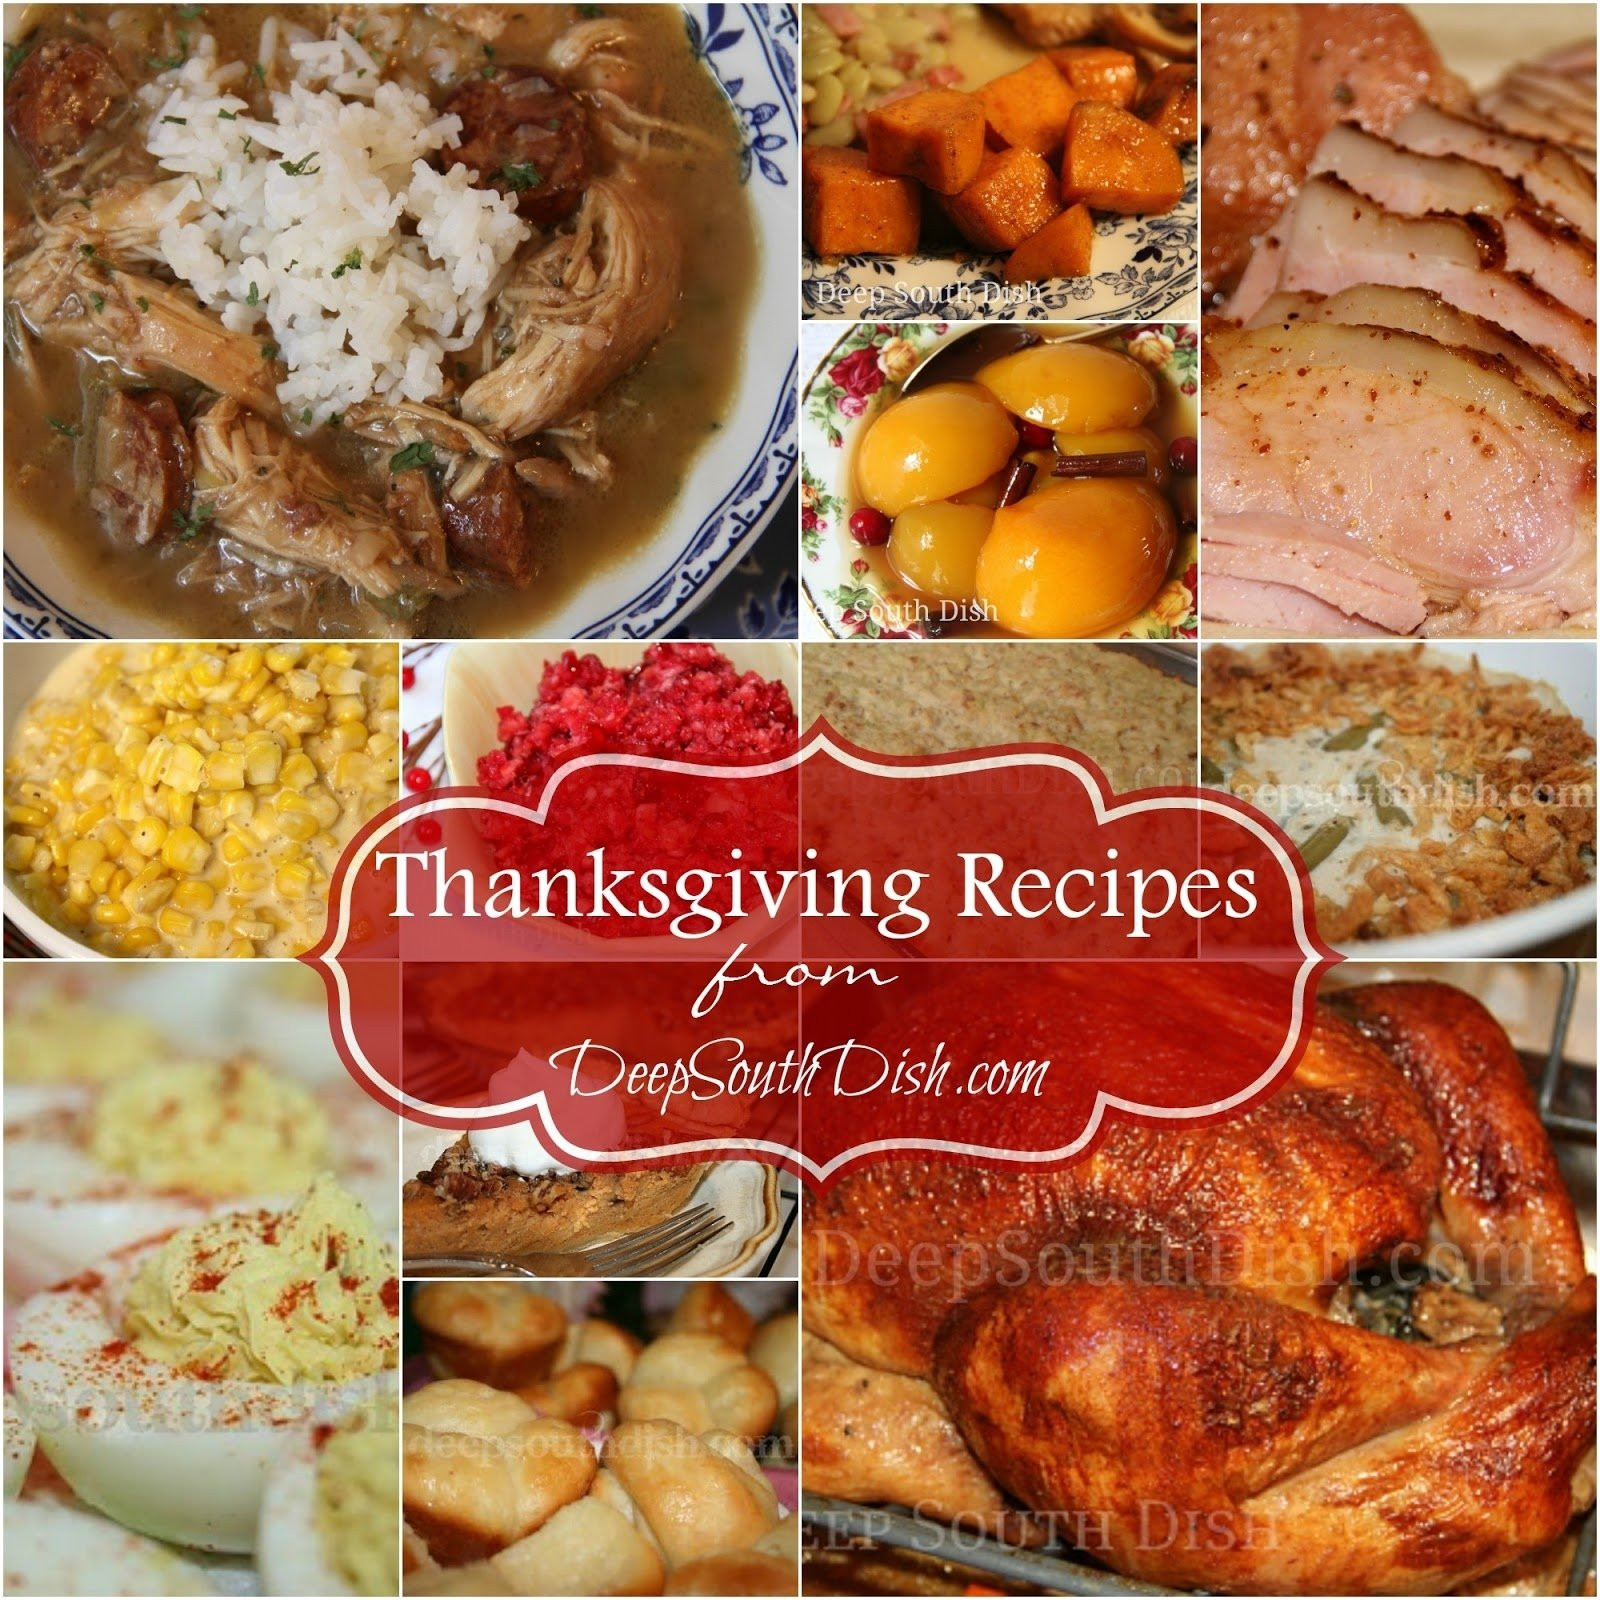 Soul Food Recipes For Thanksgiving
 10 Most Popular Soul Food Thanksgiving Menu Ideas 2019